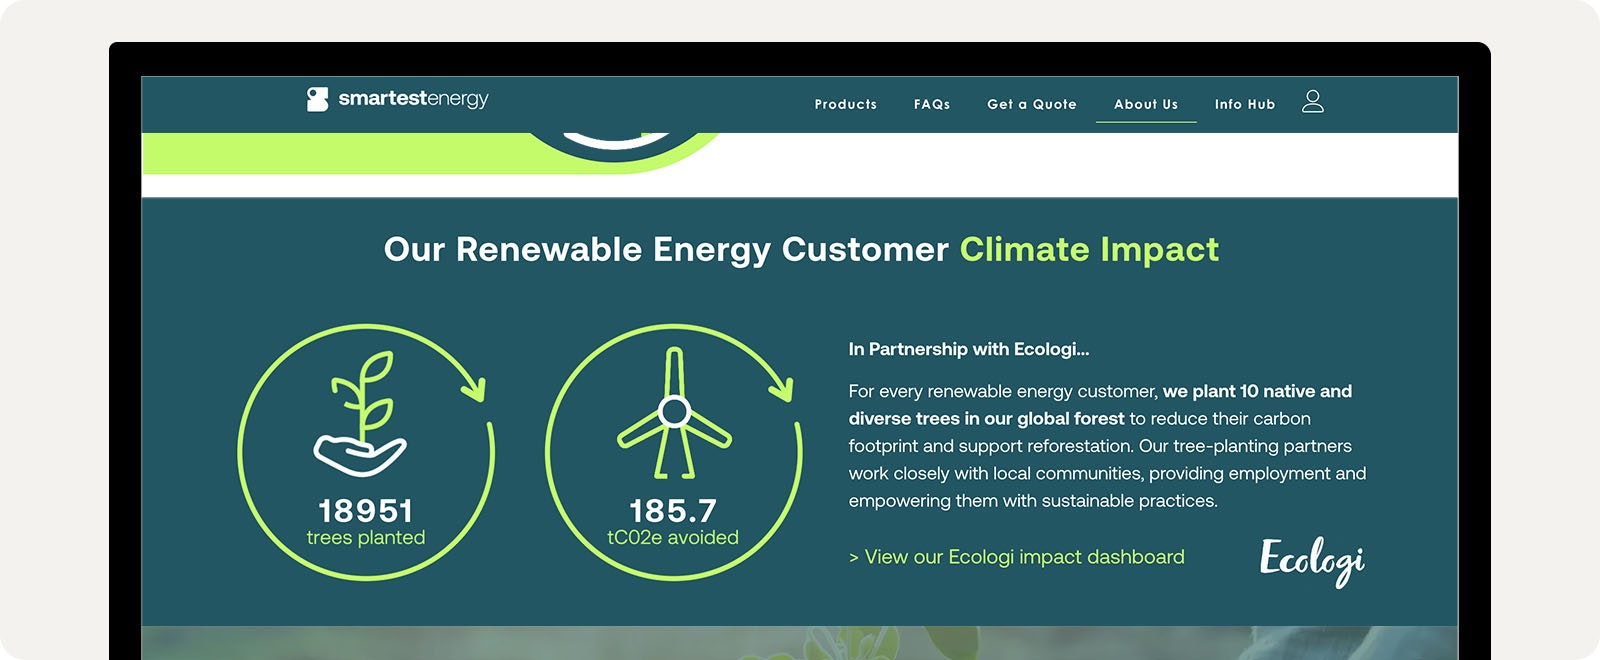 A screenshot of the Climate Impact section on the About Us page for SmartestEnergy Business